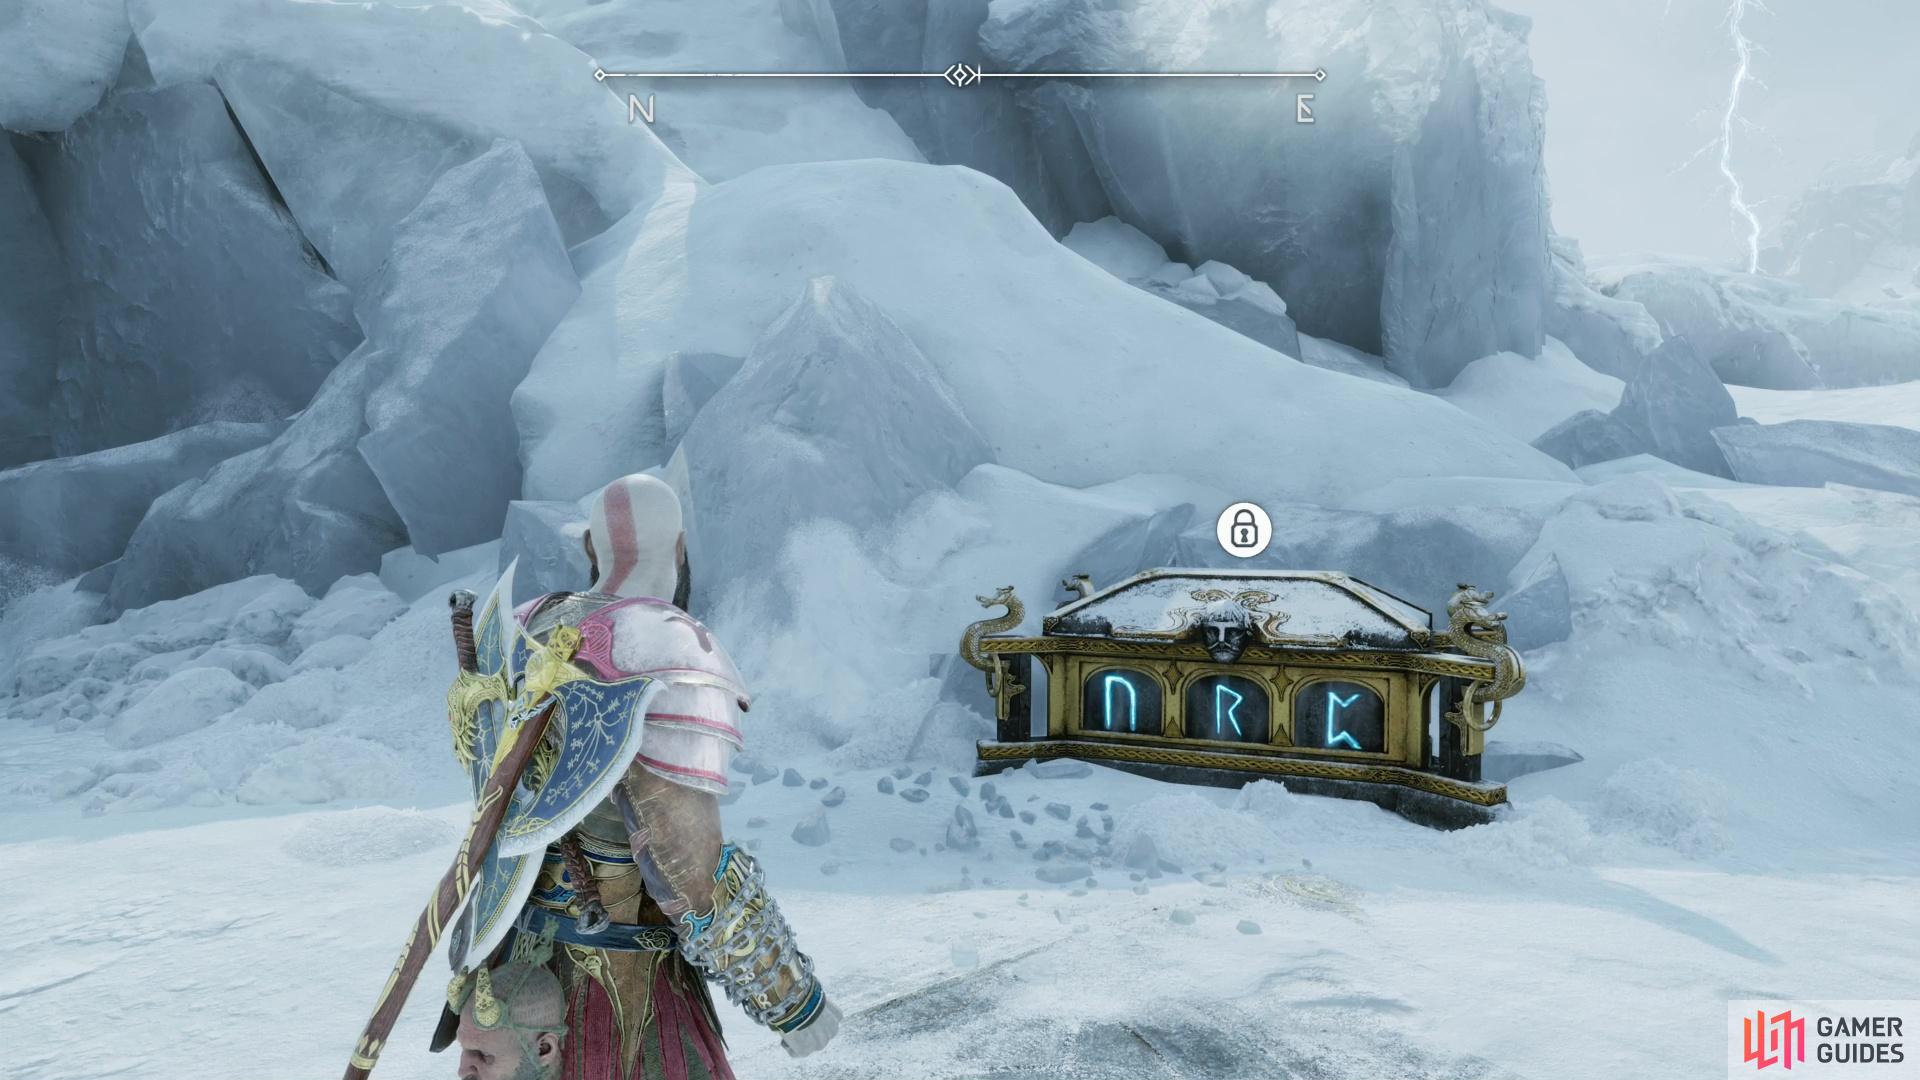 You’ll find a Nornir Chest outside of the treasury, northeast of the shield.